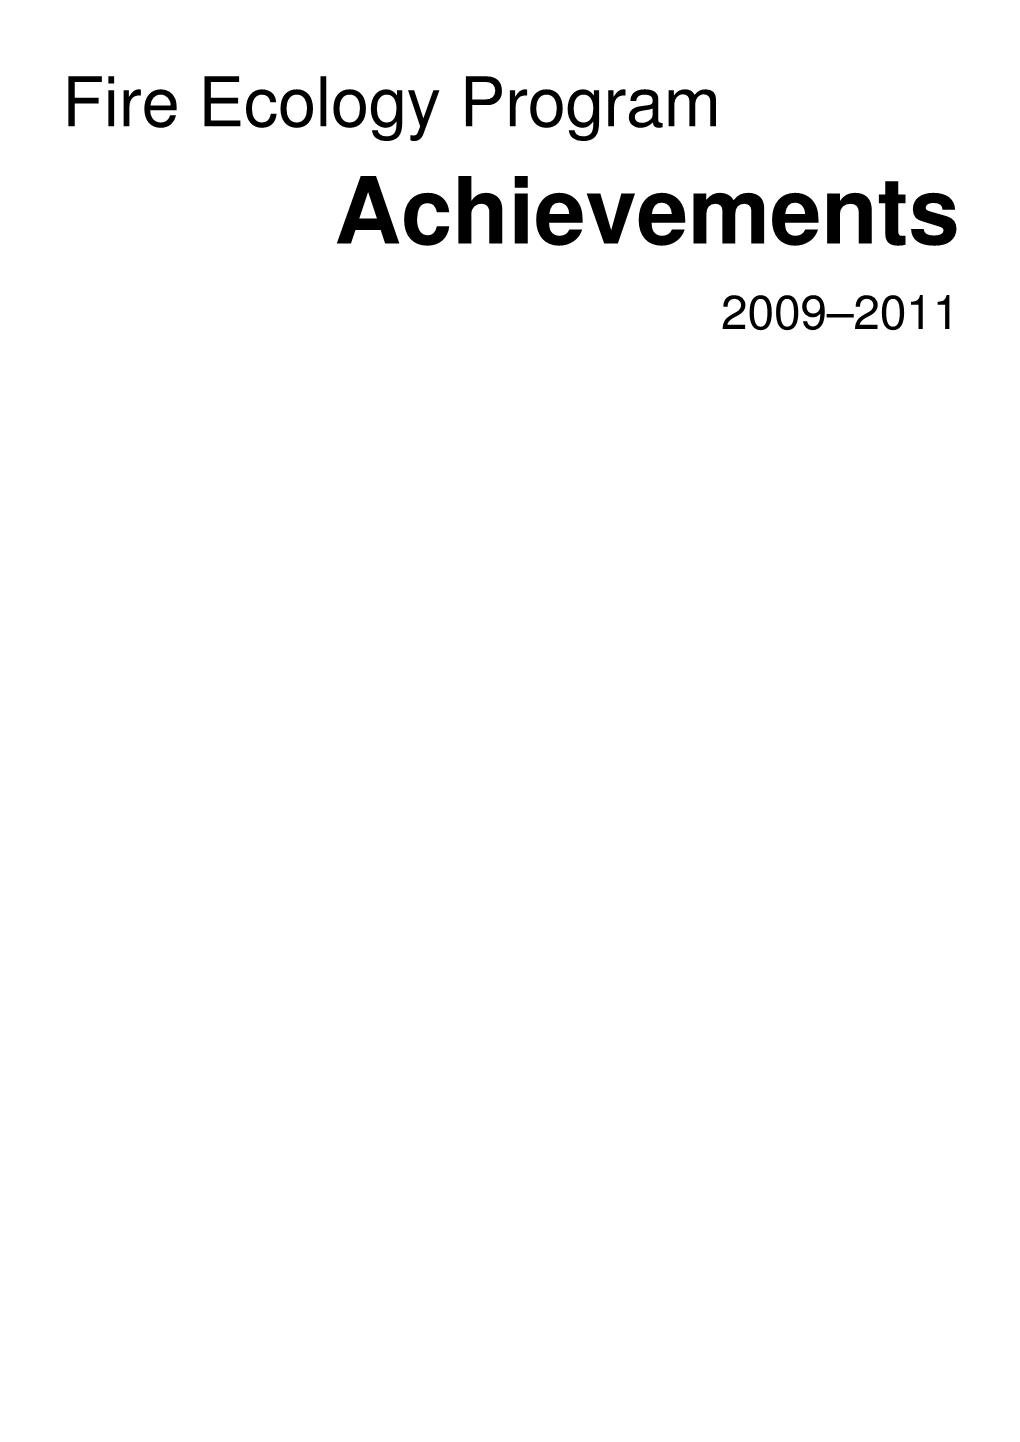 Achievements 2009–2011 Published by the Victorian Government Department of Sustainability and Environment, Melbourne, December 2011